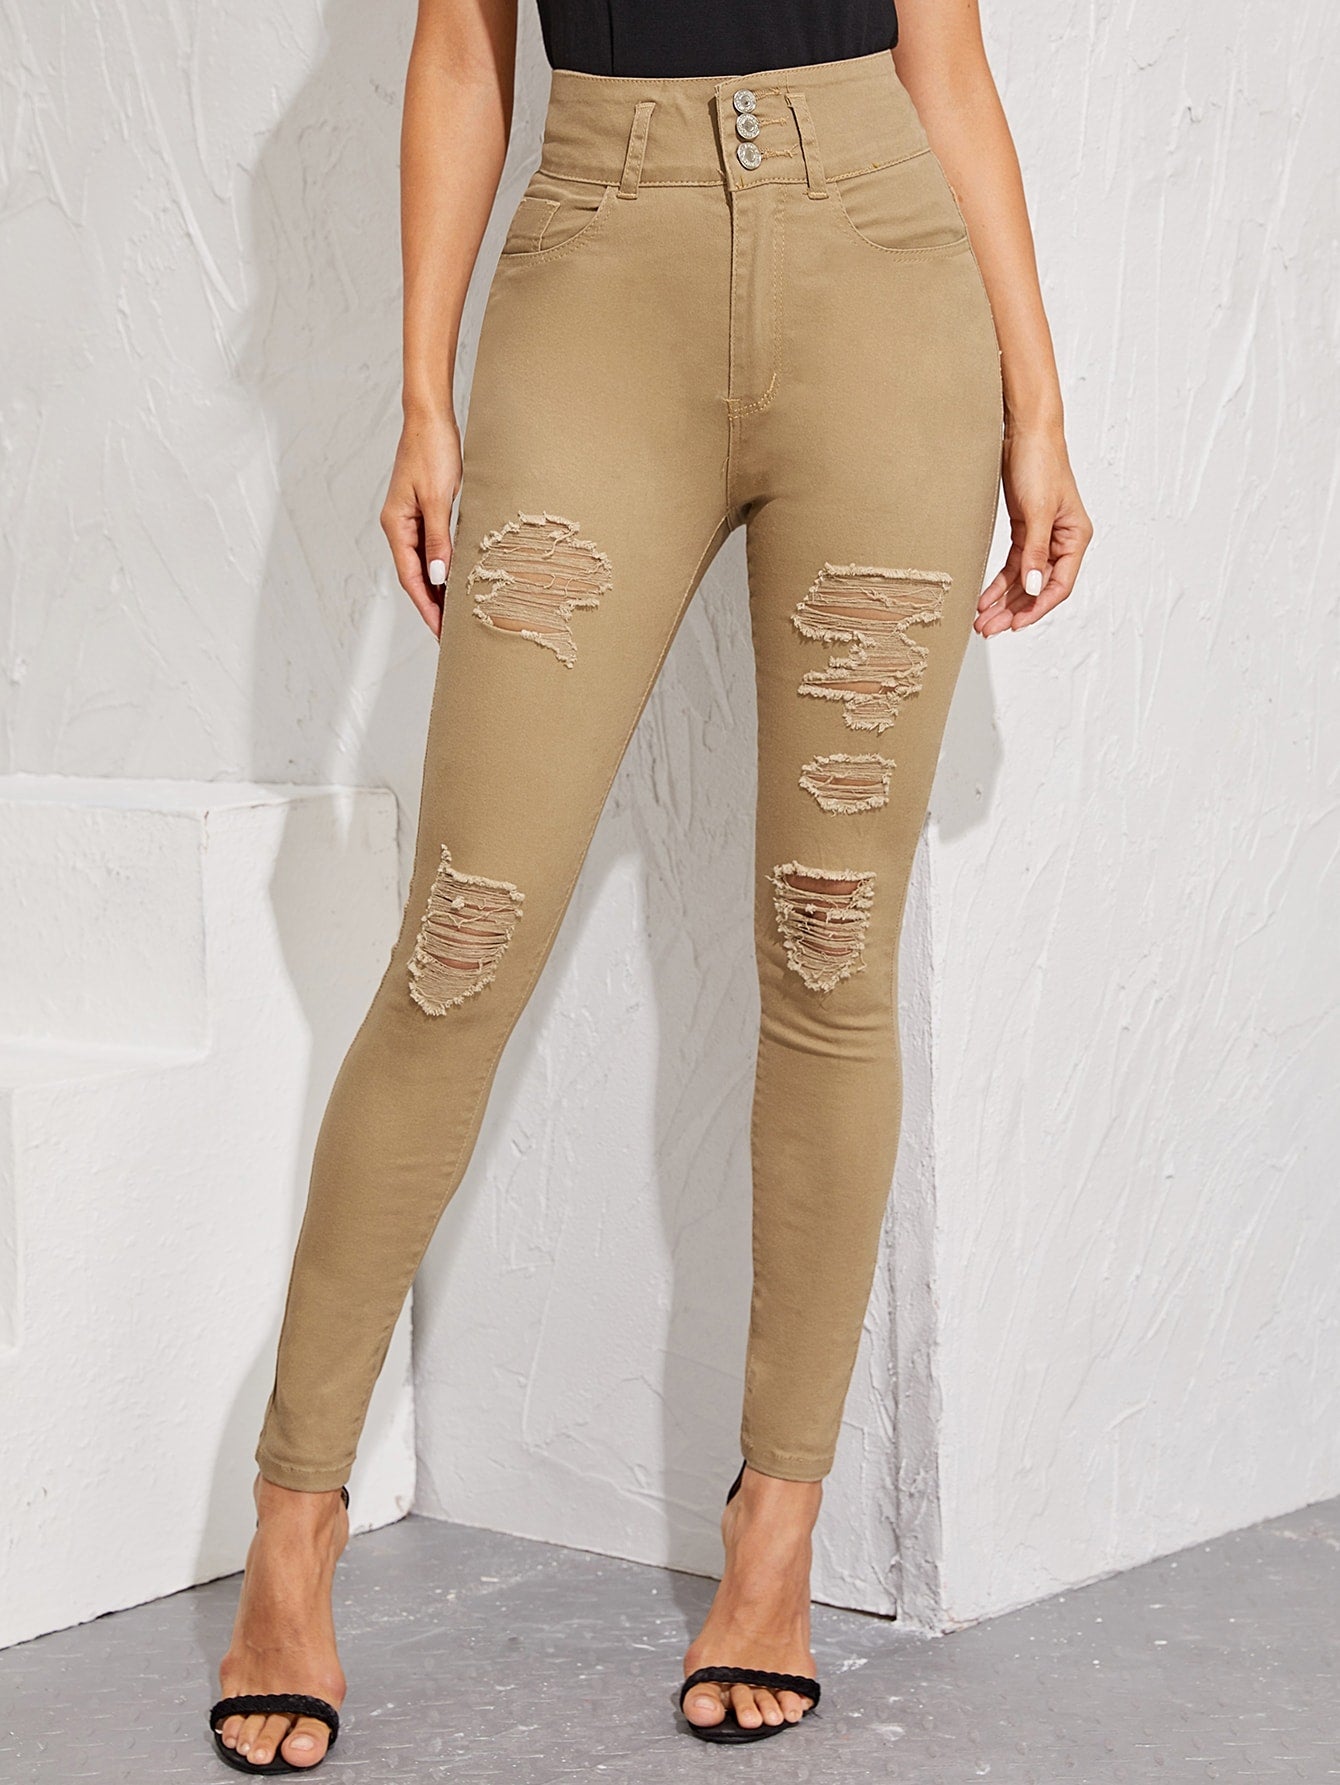 Washed Ripped High Waist Skinny Jeans